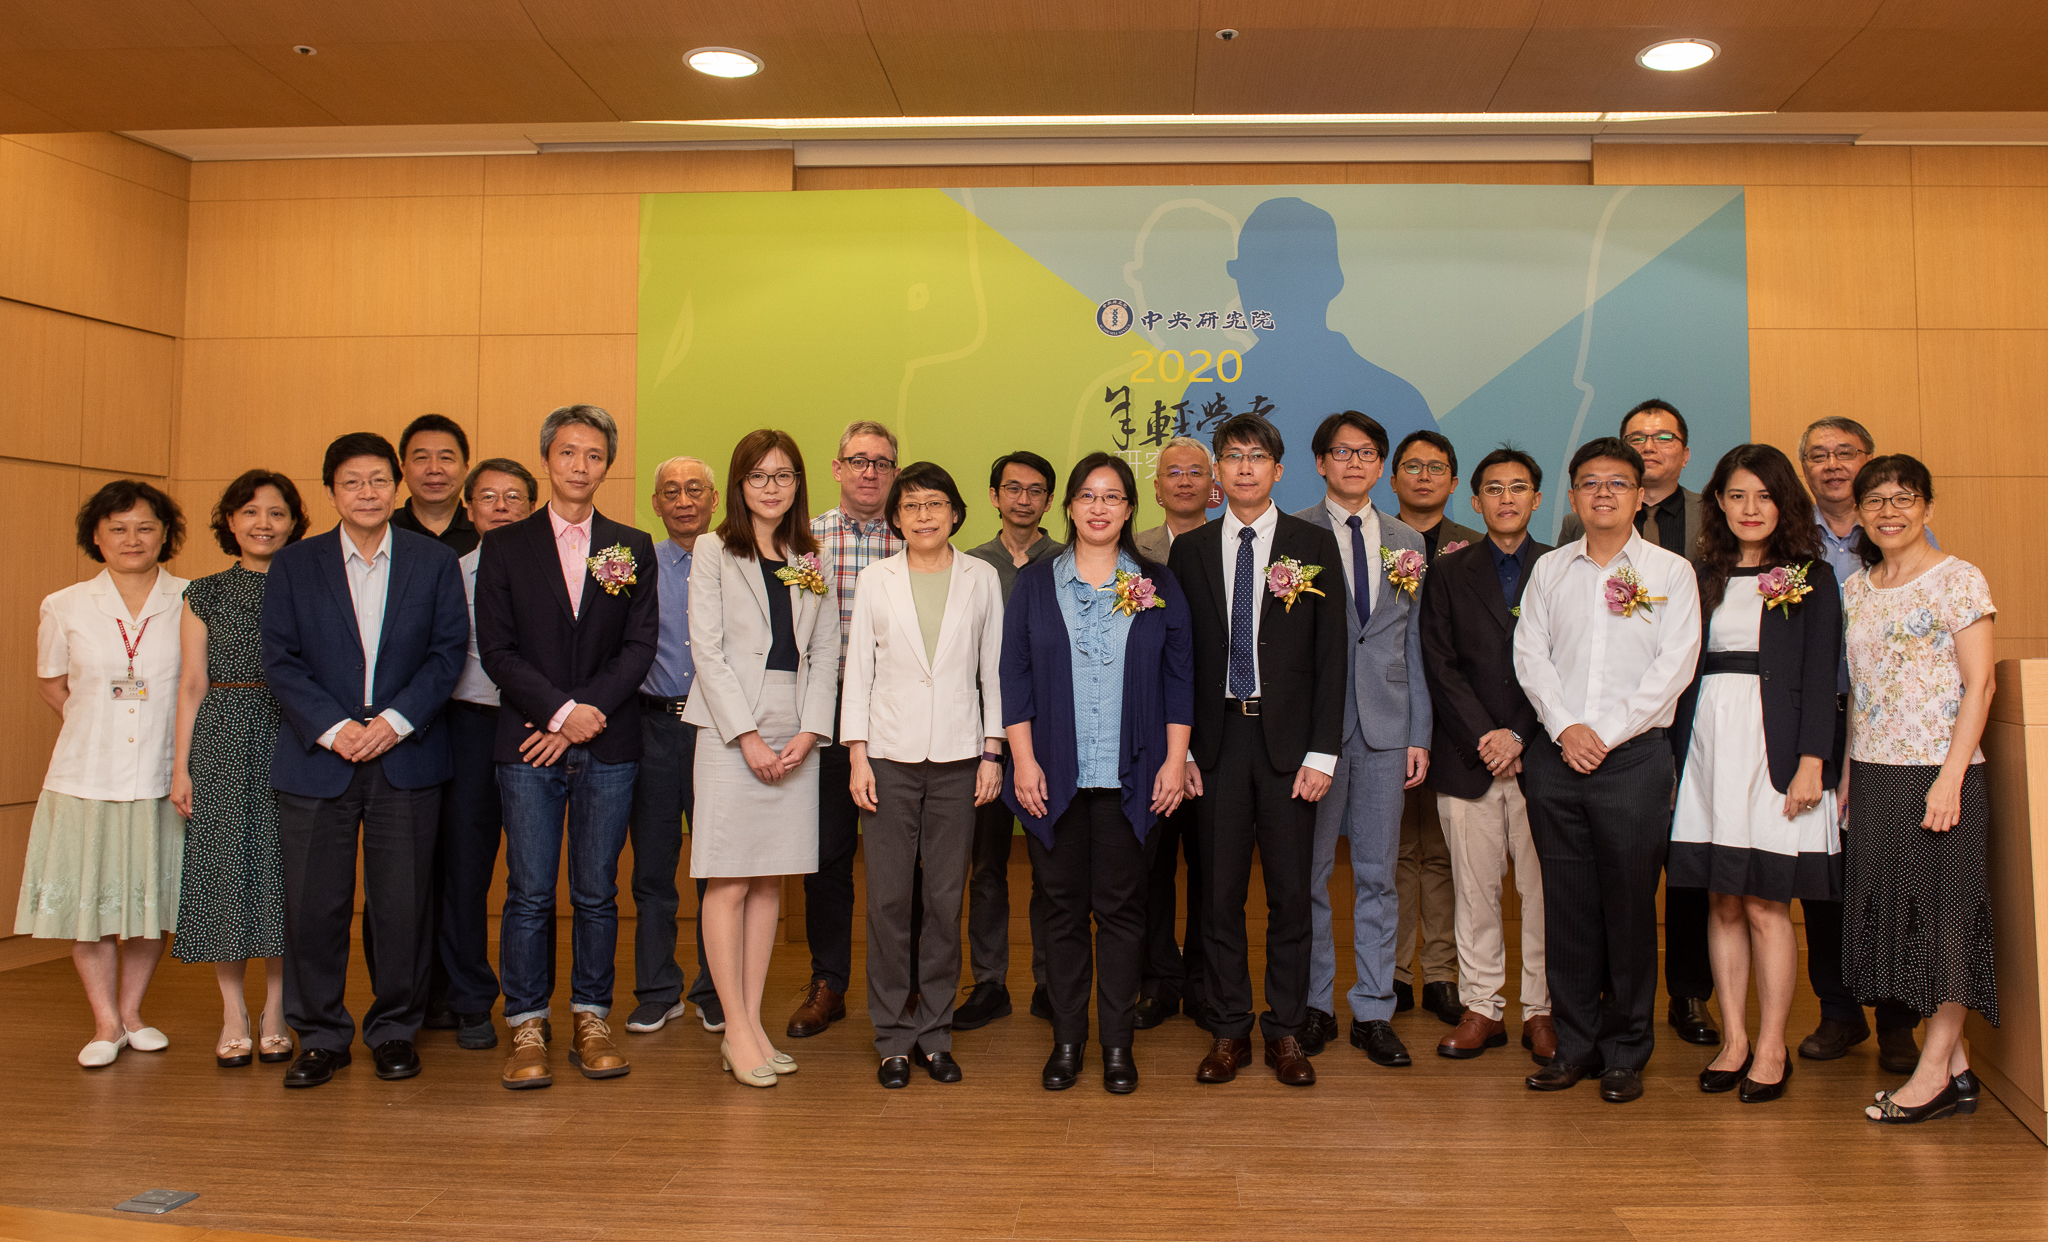 Awards Ceremony for the 2020 Academia Sinica Research Award for Junior Research Investigators photo